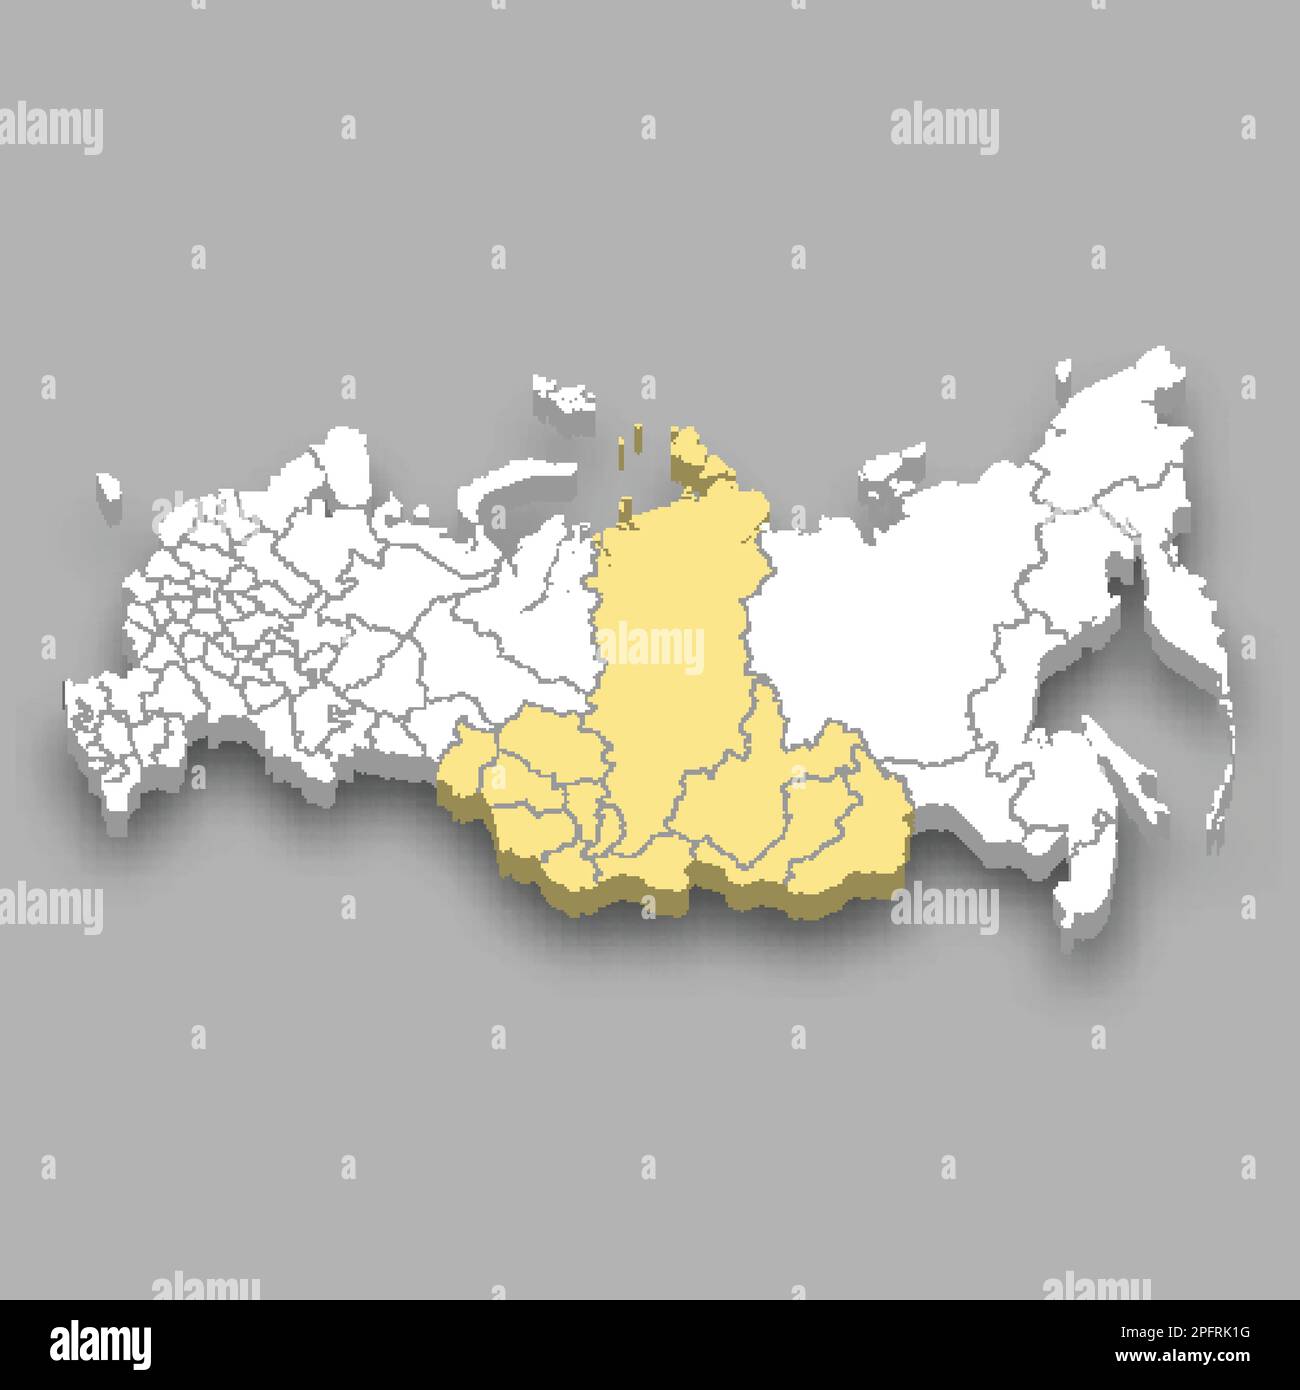 Siberia region location within Russia 3d isometric map Stock Vector